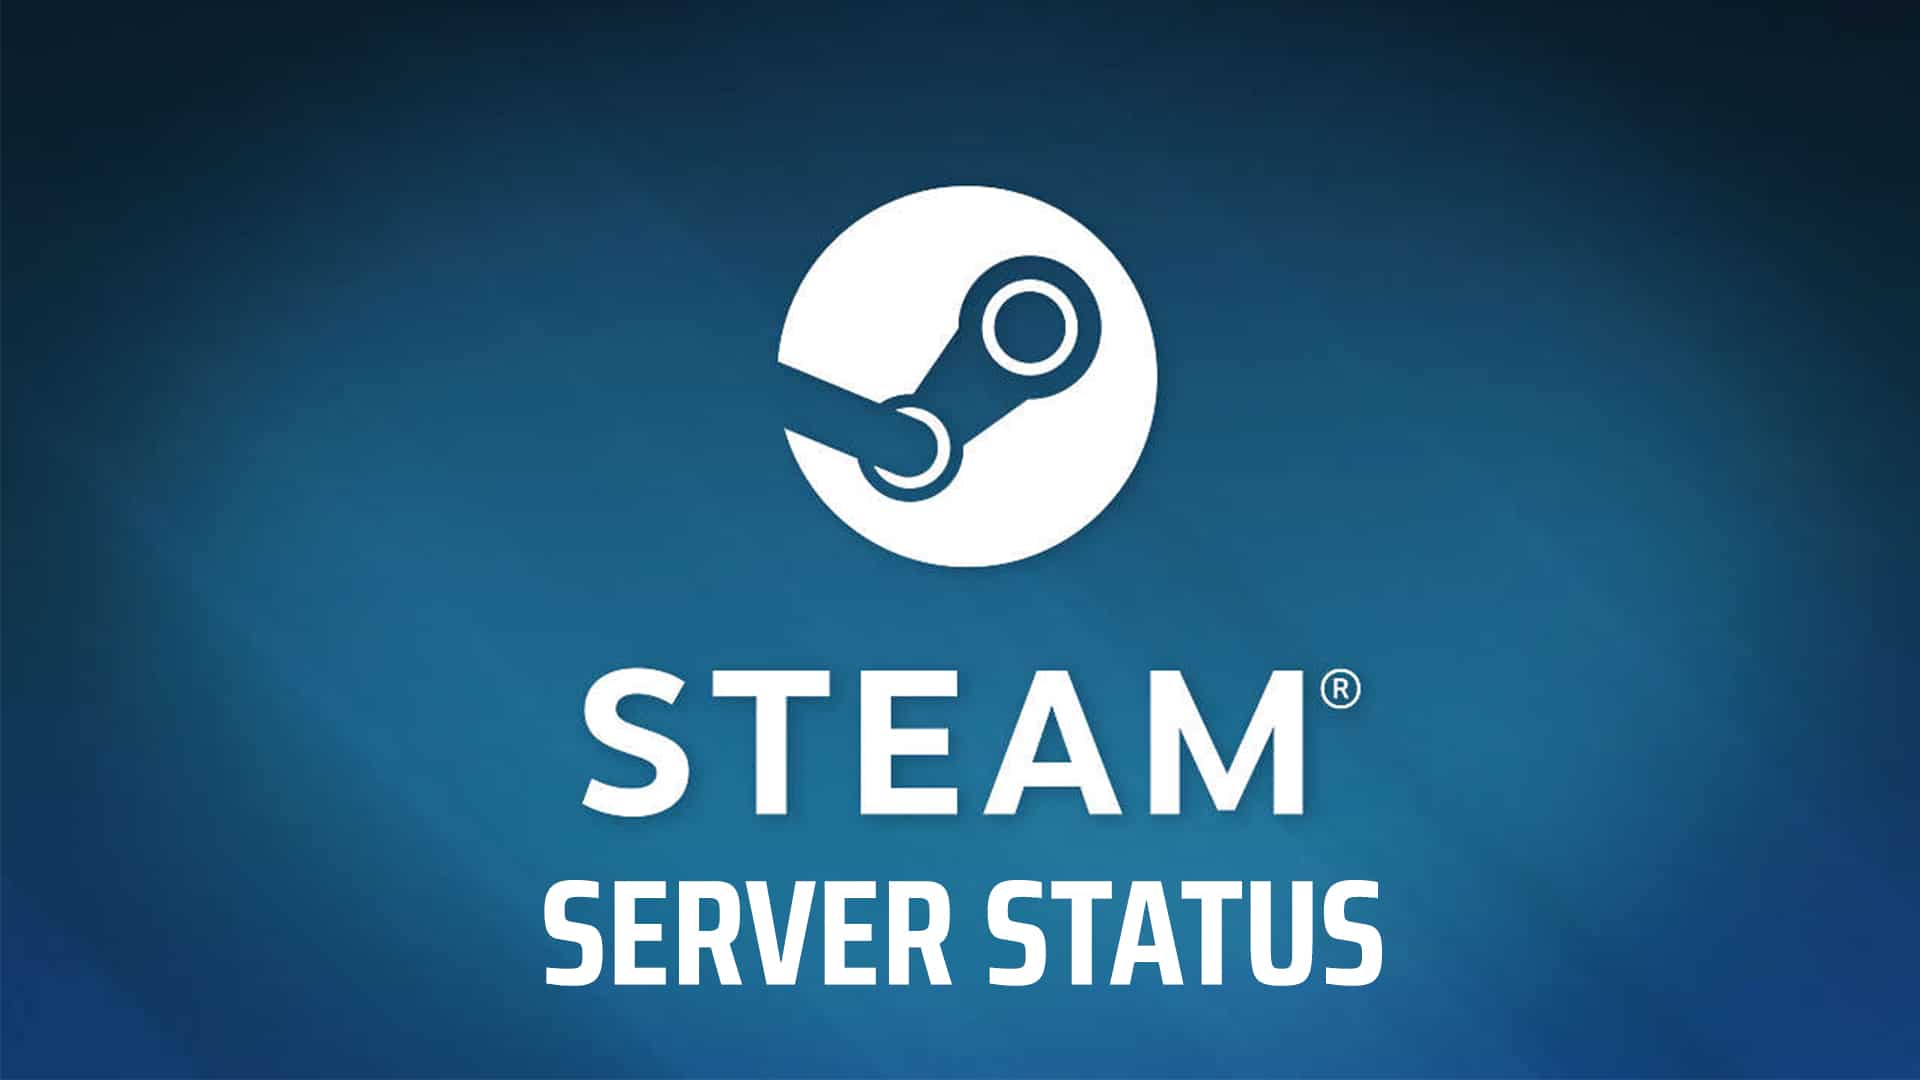 Steam Down This March 28 - Connection and Login Issues - MP1st